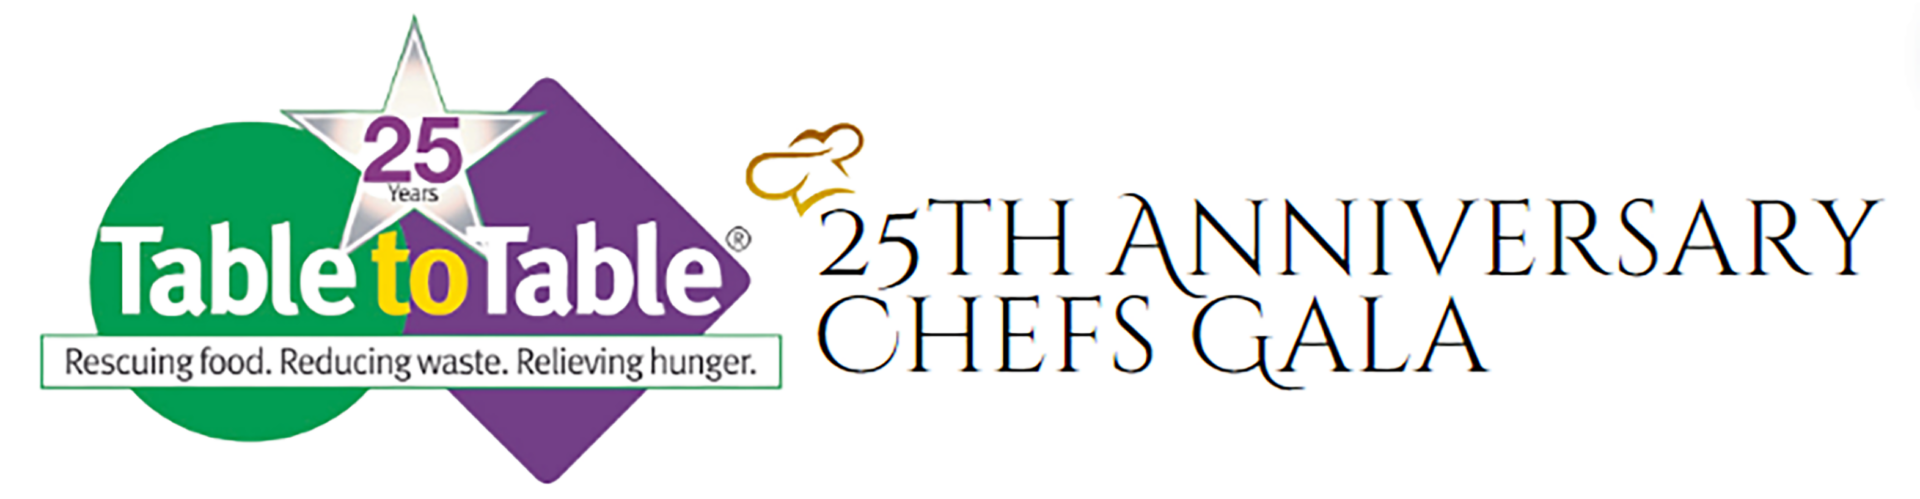 To Celebrate its 25th Anniversary, Table to Table Presents a Newly Imagined Multi-Course Chefs Gala on September 25th, Featuring 25 NJ Chefs